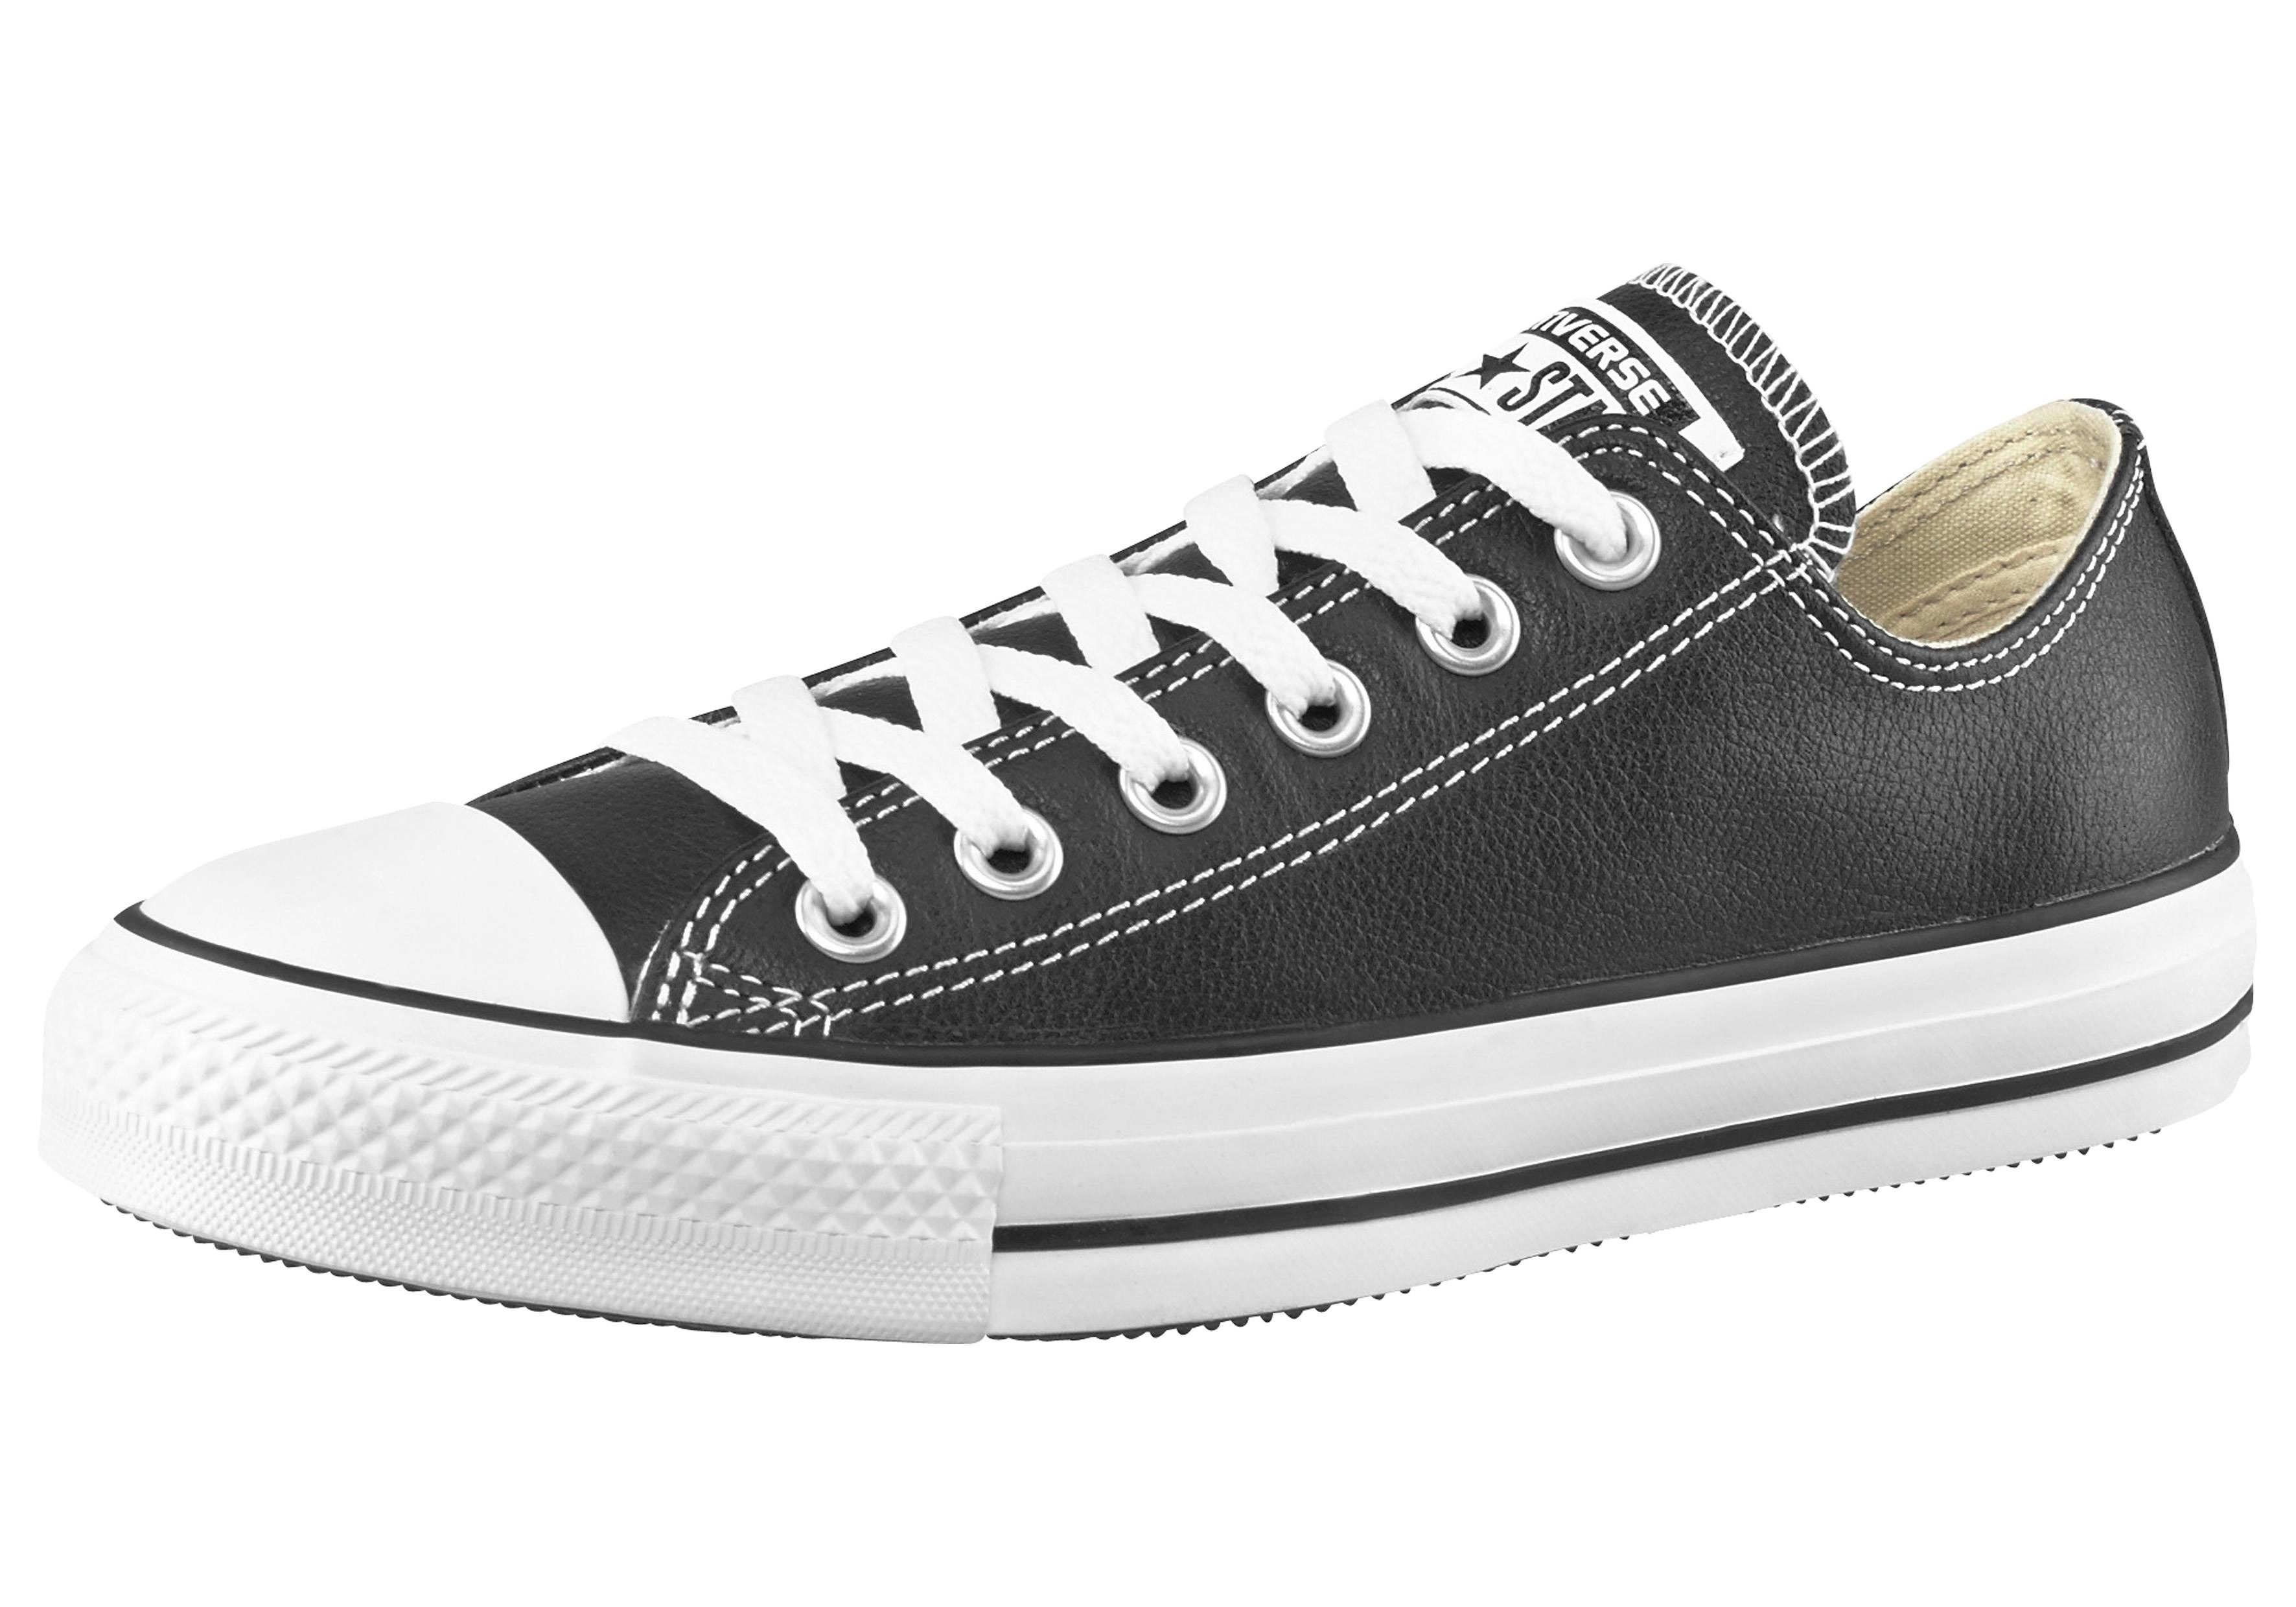 Converse »Chuck Taylor All Star Basic Leather Ox« Sneaker online kaufen |  OTTO